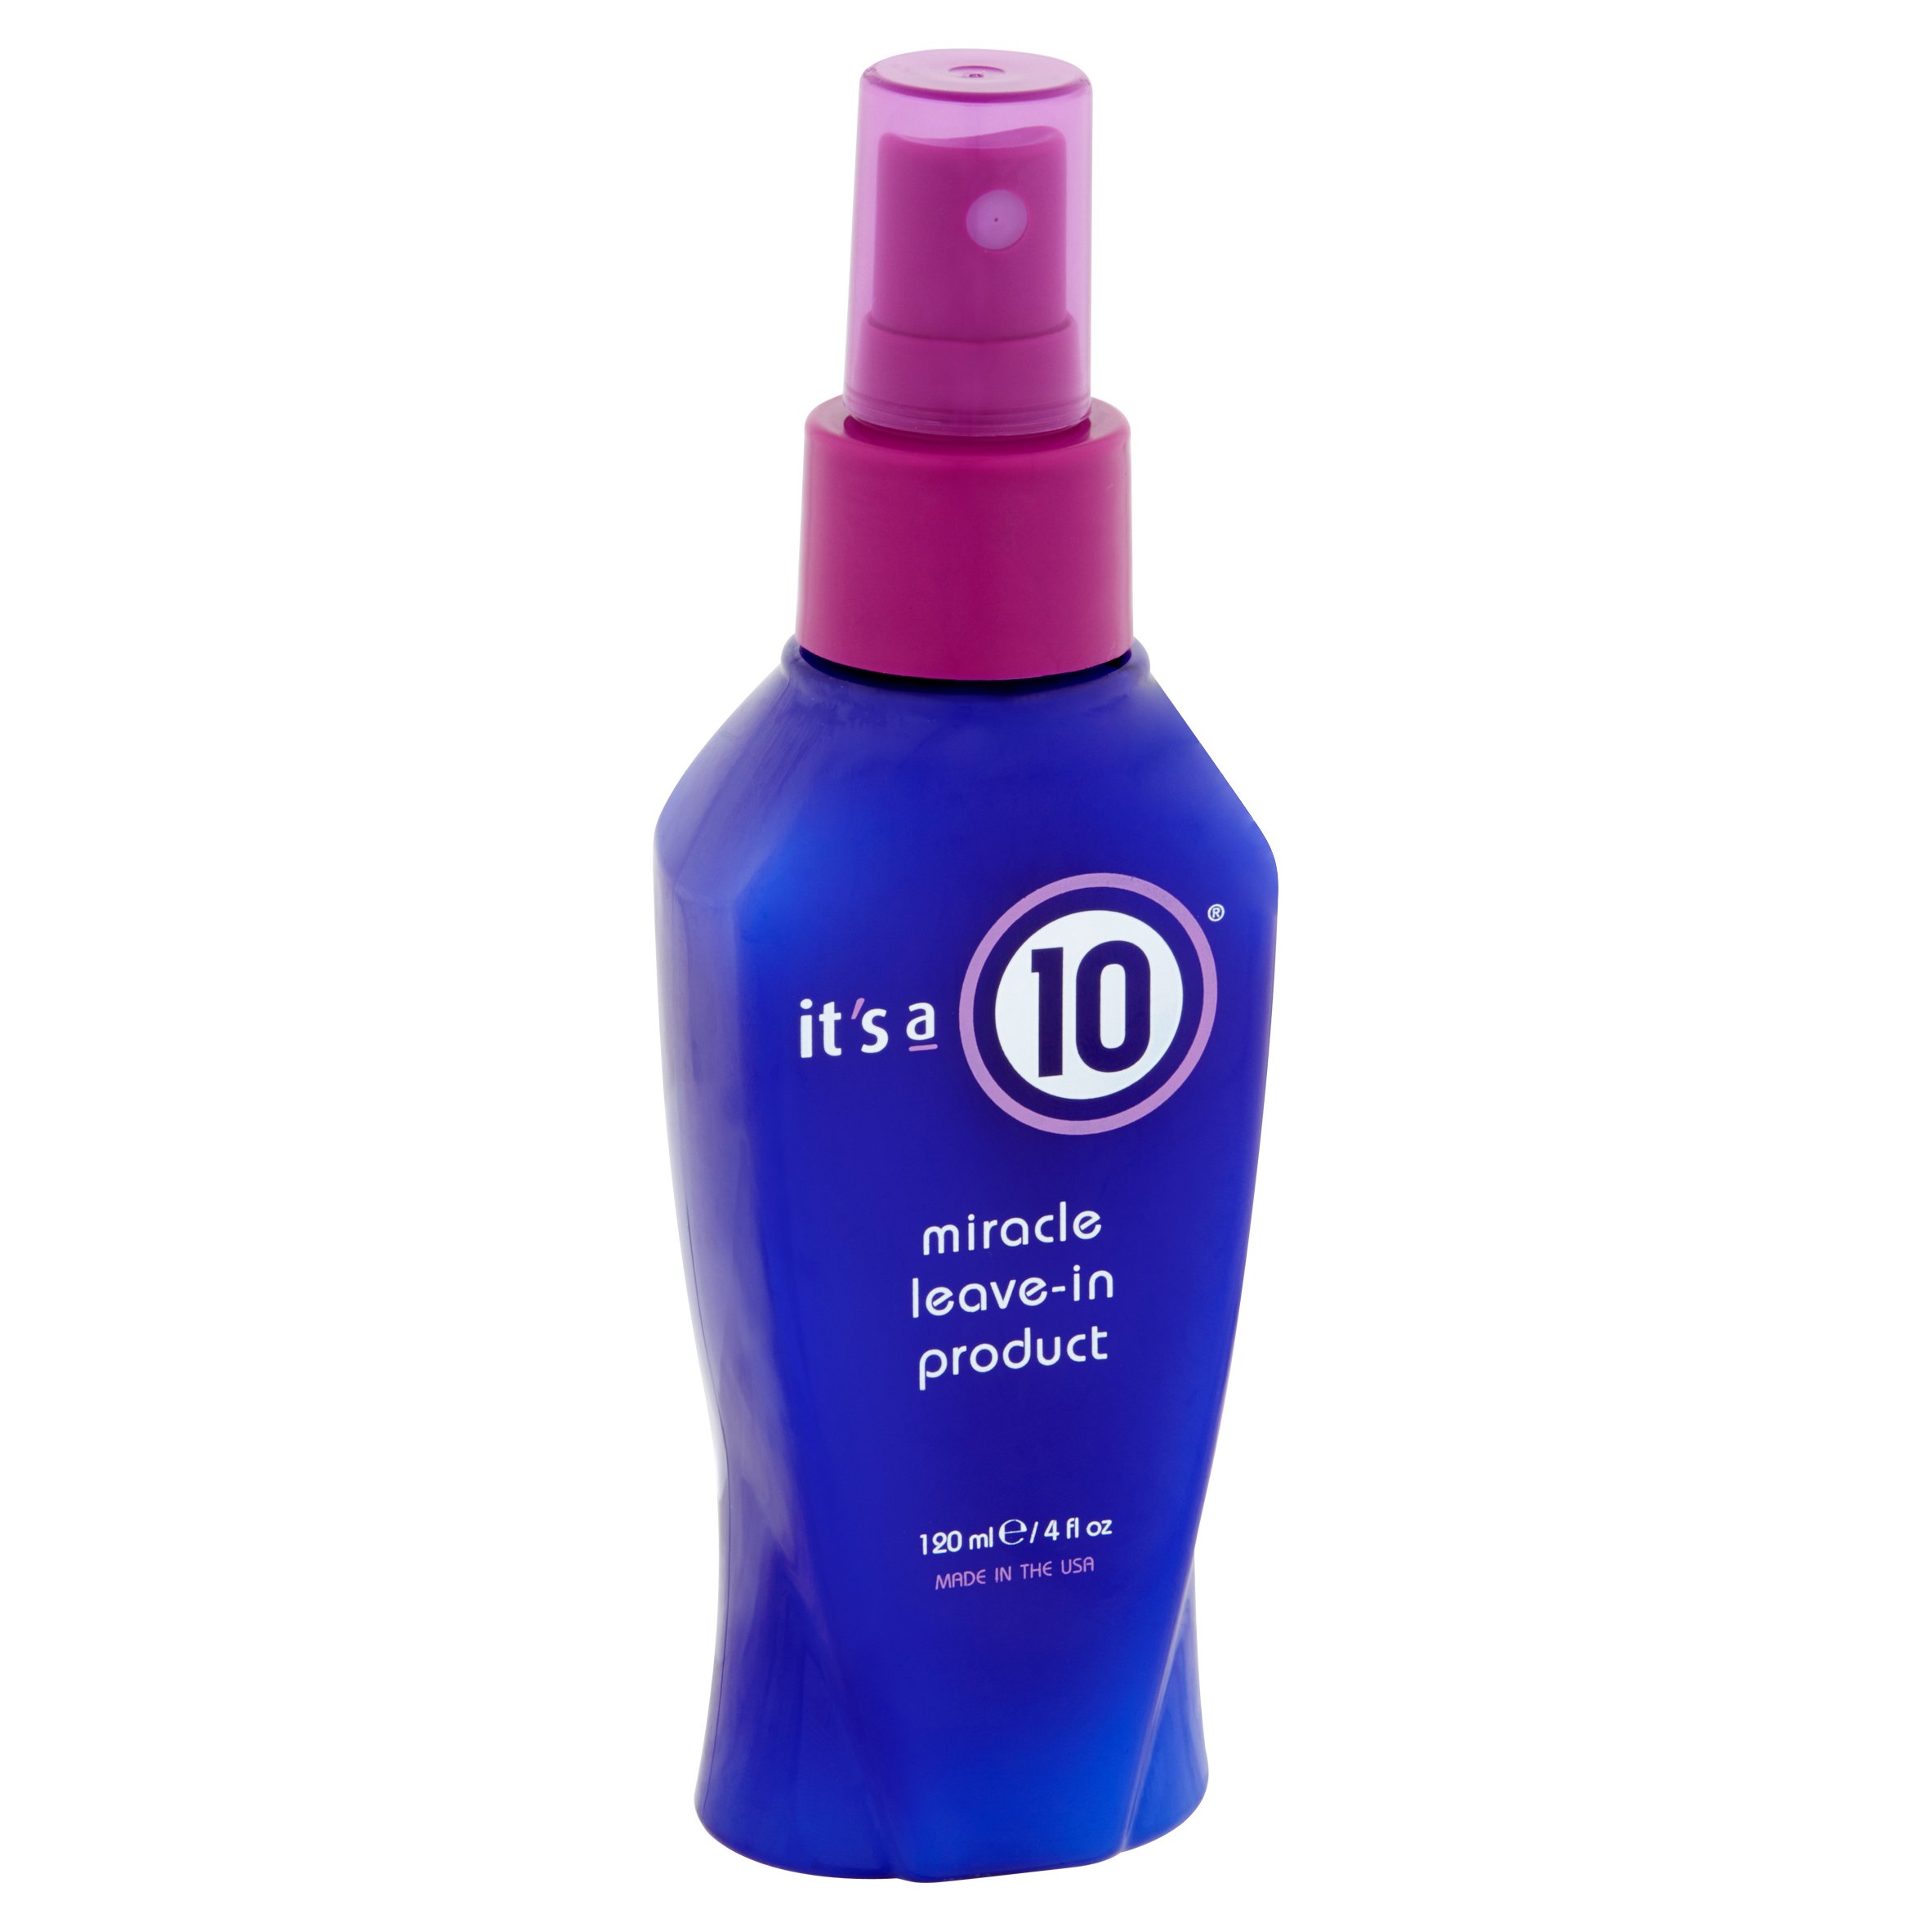 It's a 10 Miracle Frizz Control Shine Enhancing Leave-in Conditioner, 4 fl oz - image 2 of 5